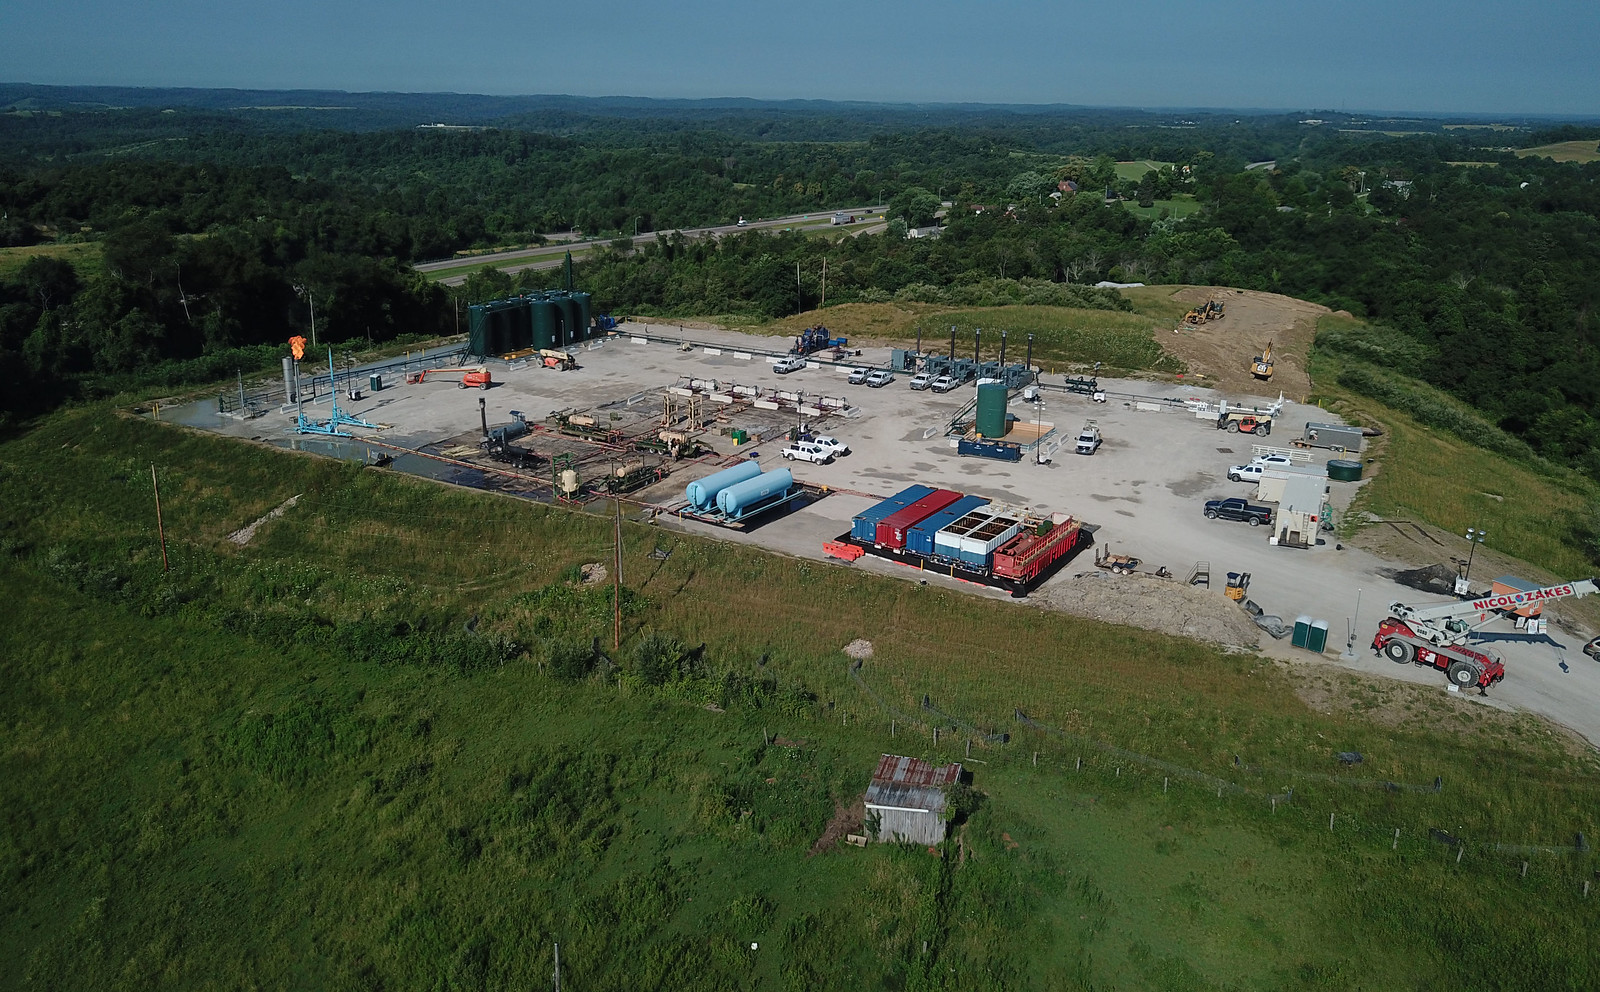 Aerial photograph of a fracking pad, Fairview, Ohio. The photo shows a flat, cleared space on top of a hill. The cleared space has equipment and machinery on it. The surrounding landscape is green and covered with trees, grass, and other plants.